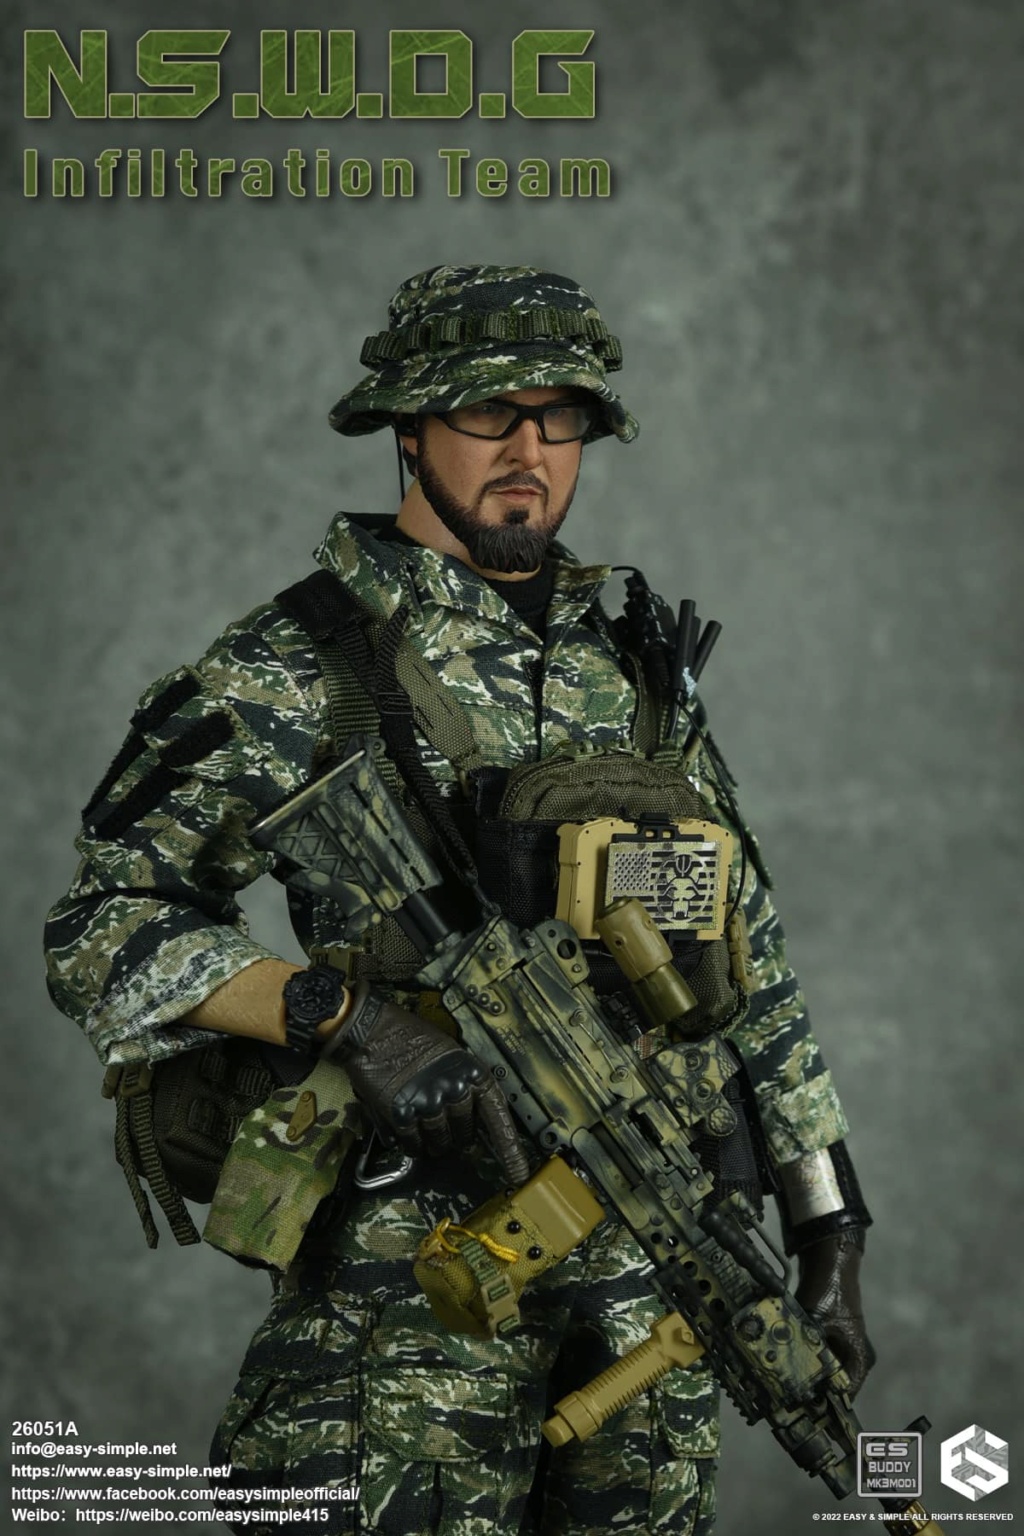 NEW PRODUCT: EASY AND SIMPLE 1/6 SCALE FIGURE: N.S.W.D.G INFILTRATION TEAM - (2 Versions) 16371